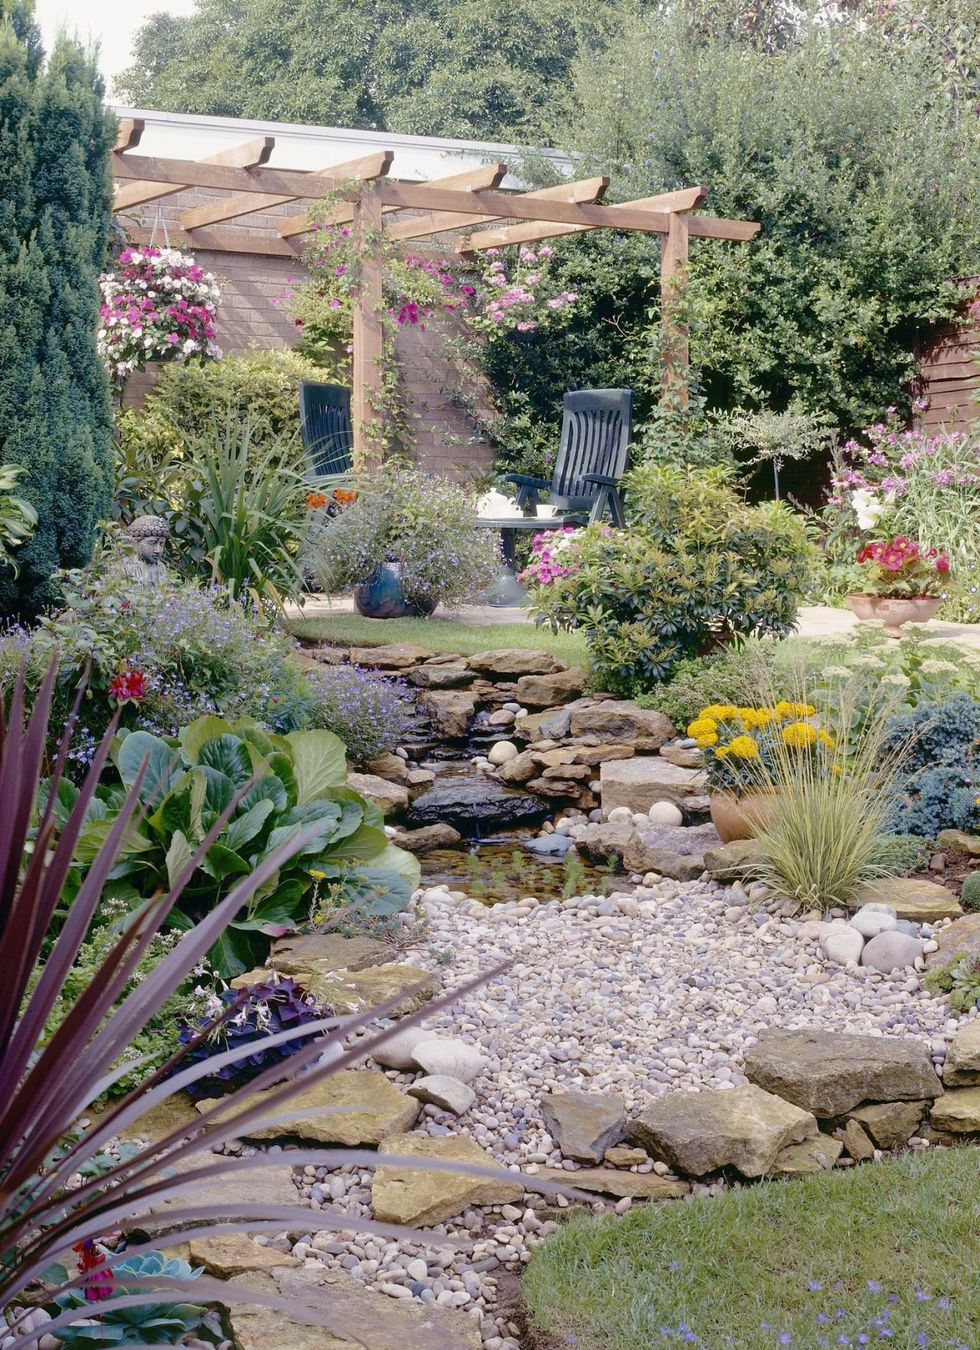 <p>I mention soil last, but it is always the most important part of creating a healthy garden. Before planting, combine small rocks, a layer of sand (use a few inches) and a layer of a lean topsoil.  The top layer of soil should have some peat and small lava rock mixed in.  You don't want to use a rich nutrient rich soil with lots of compost because rock garden plant like it lean and mean.  Soil that is too rich will result in unhappy looking plants!</p><p><strong data-redactor-tag="strong" data-verified="redactor">MORE:&nbsp;</strong><span><a href="http://www.countryliving.co.uk/homes-interiors/gardens/news/a3428/nano-gardening-trend/" target="_blank" data-tracking-id="recirc-text-link"><strong data-redactor-tag="strong" data-verified="redactor">Nano gardening is on the rise – and this is why</strong></a></span></p>